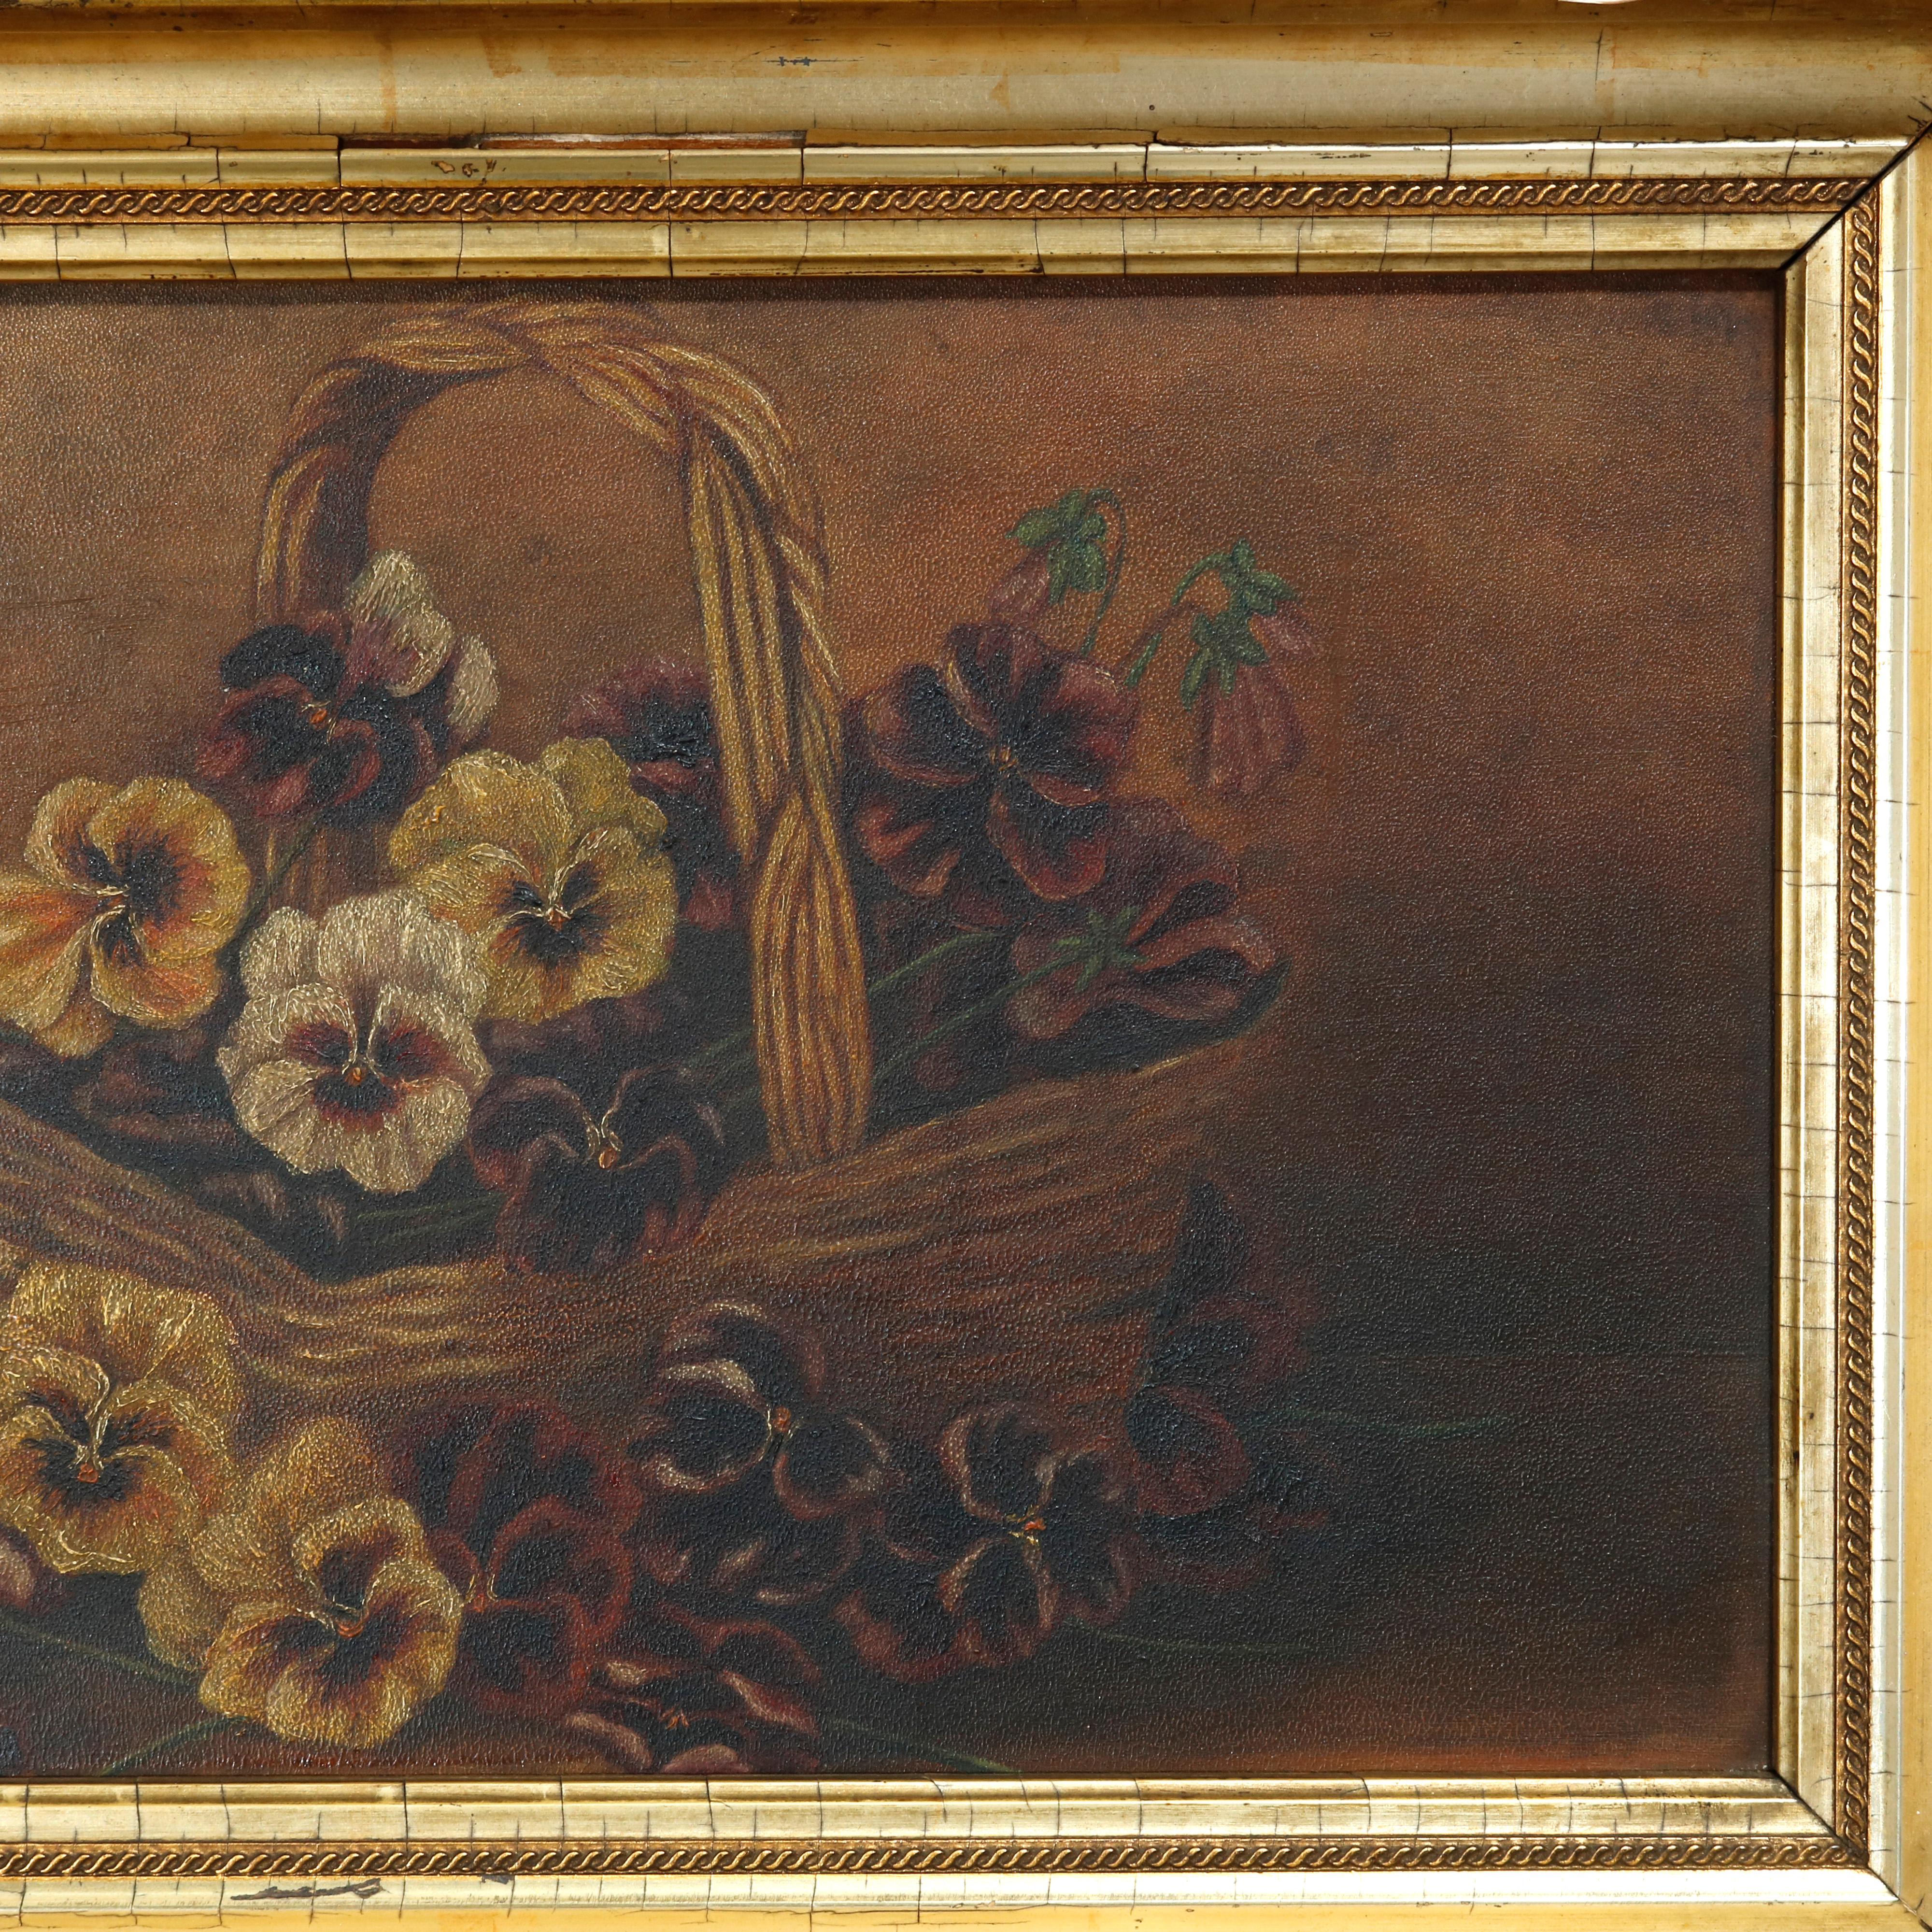 Victorian Antique Floral Still Life Oil Painting on Board of Pansies in a Basket, c1890